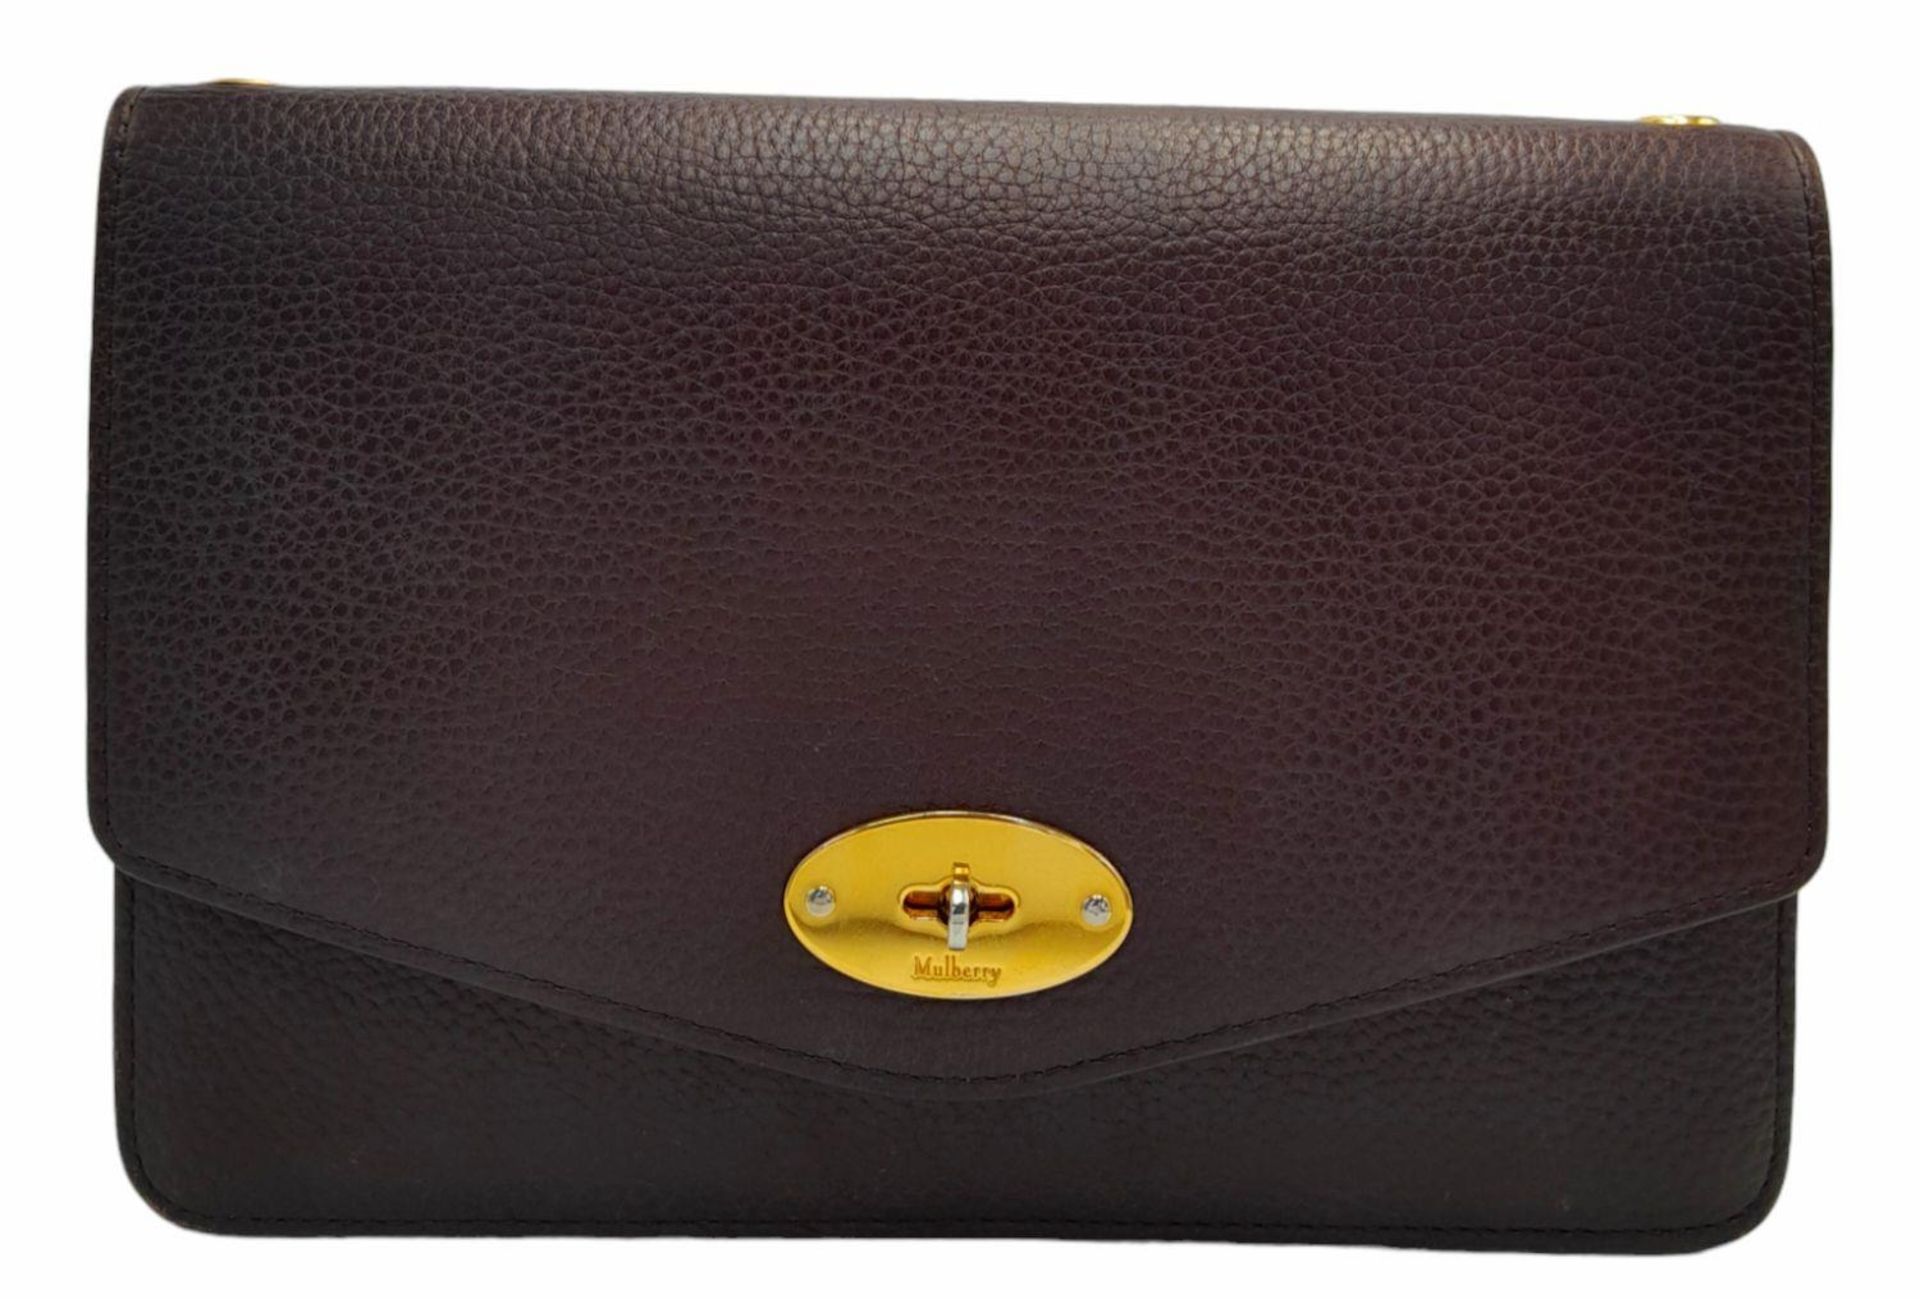 A Mulberry Oxblood Darley Bag. Leather exterior with gold-toned hardware and twist lock closure.